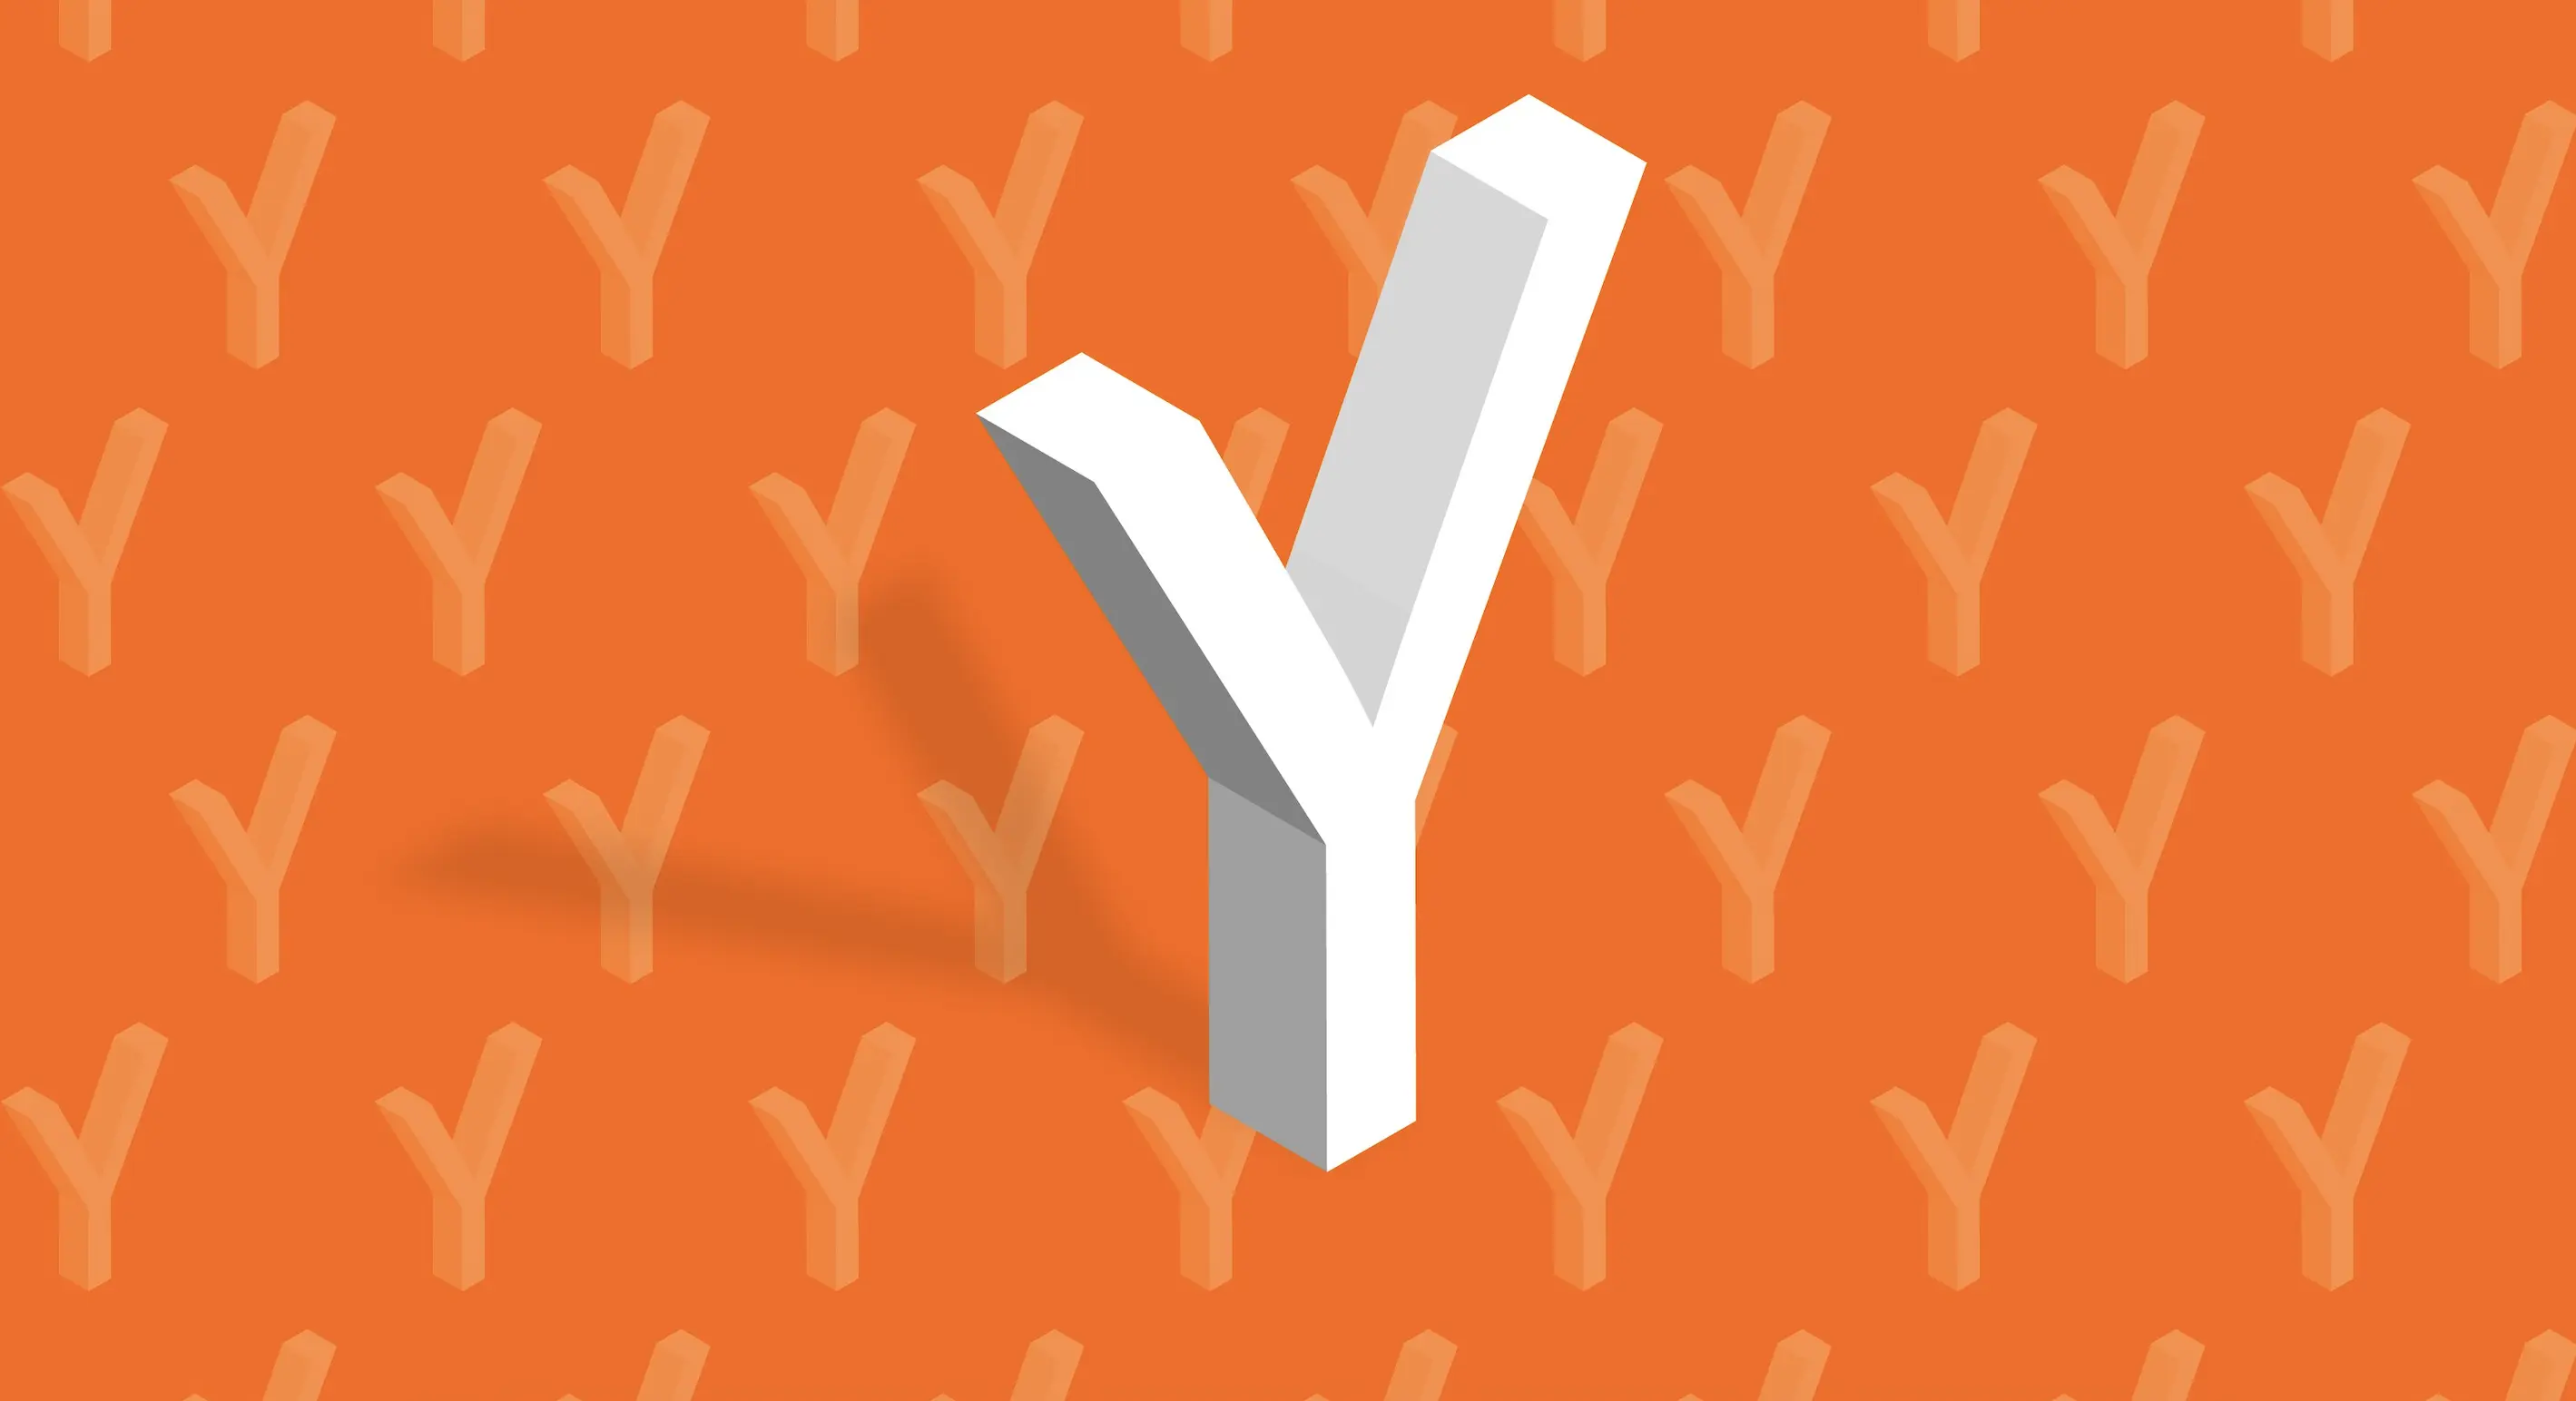 Life after Y Combinator: Three Key Lessons for Startups